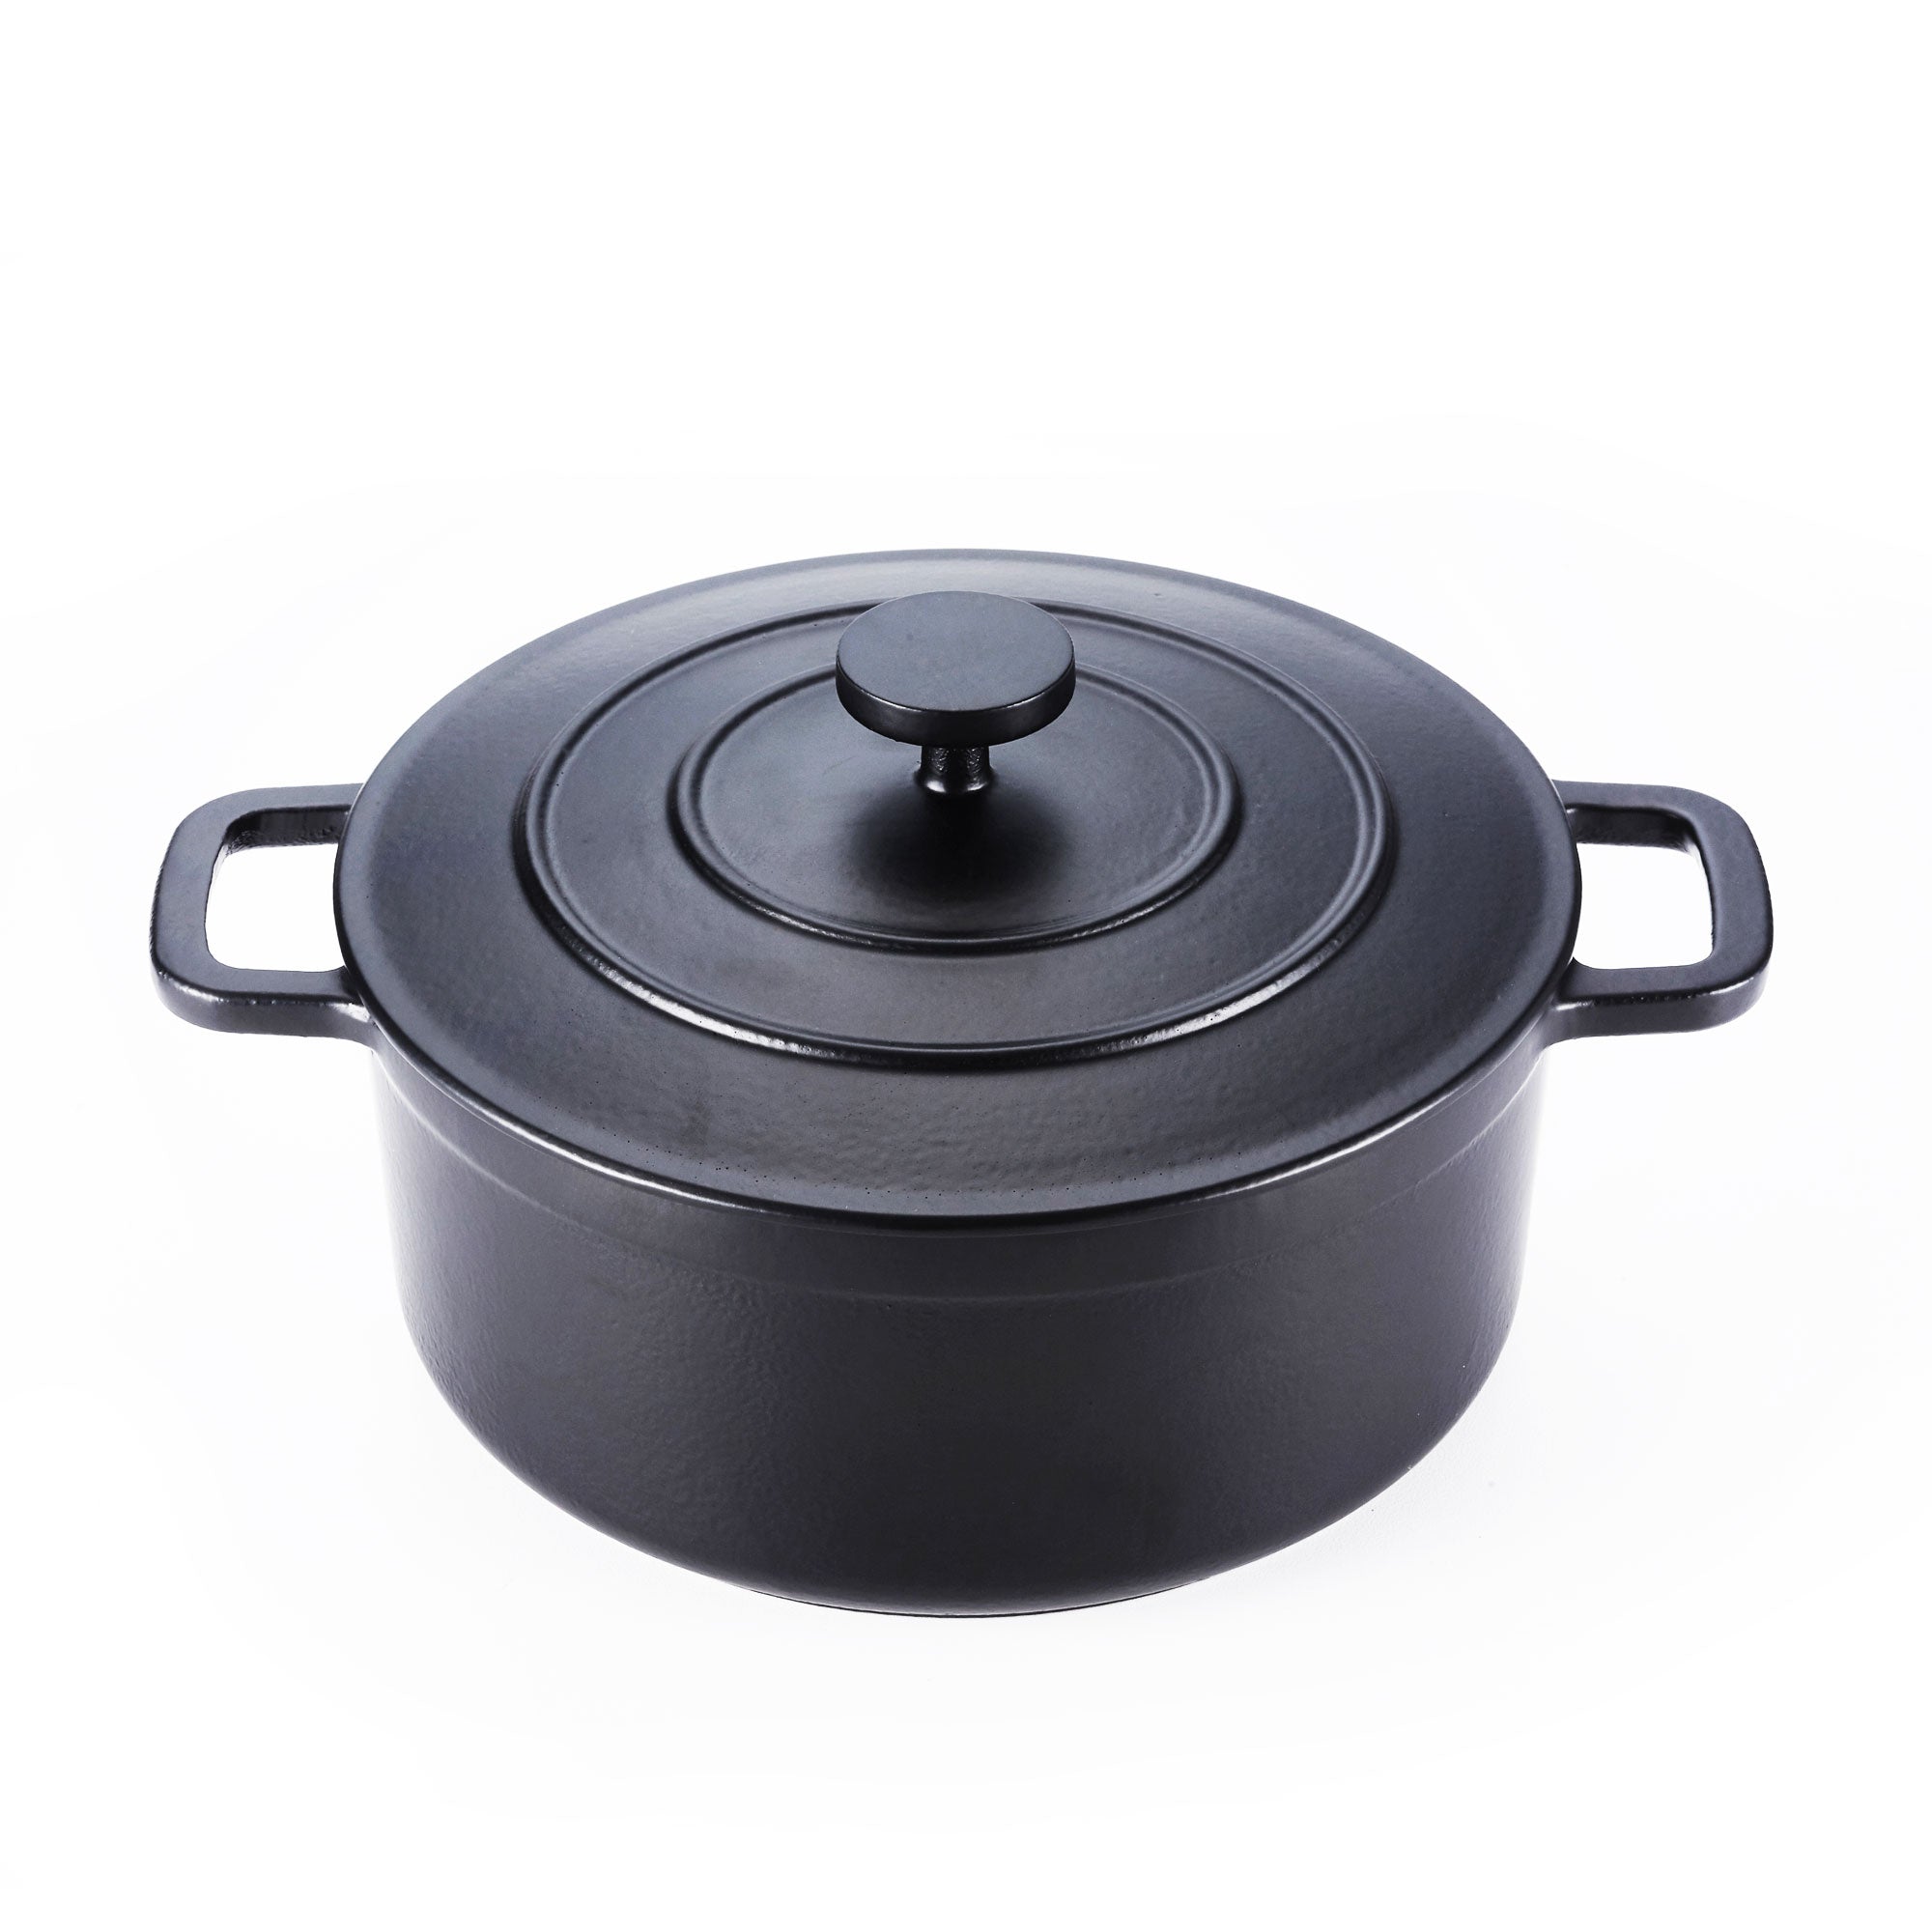 MOOSSE Premium Enameled Cast Iron Mini Wok Pan with Lid for Induction Cooktop, Stove, No Seasoning Required, 104A (26 cm)